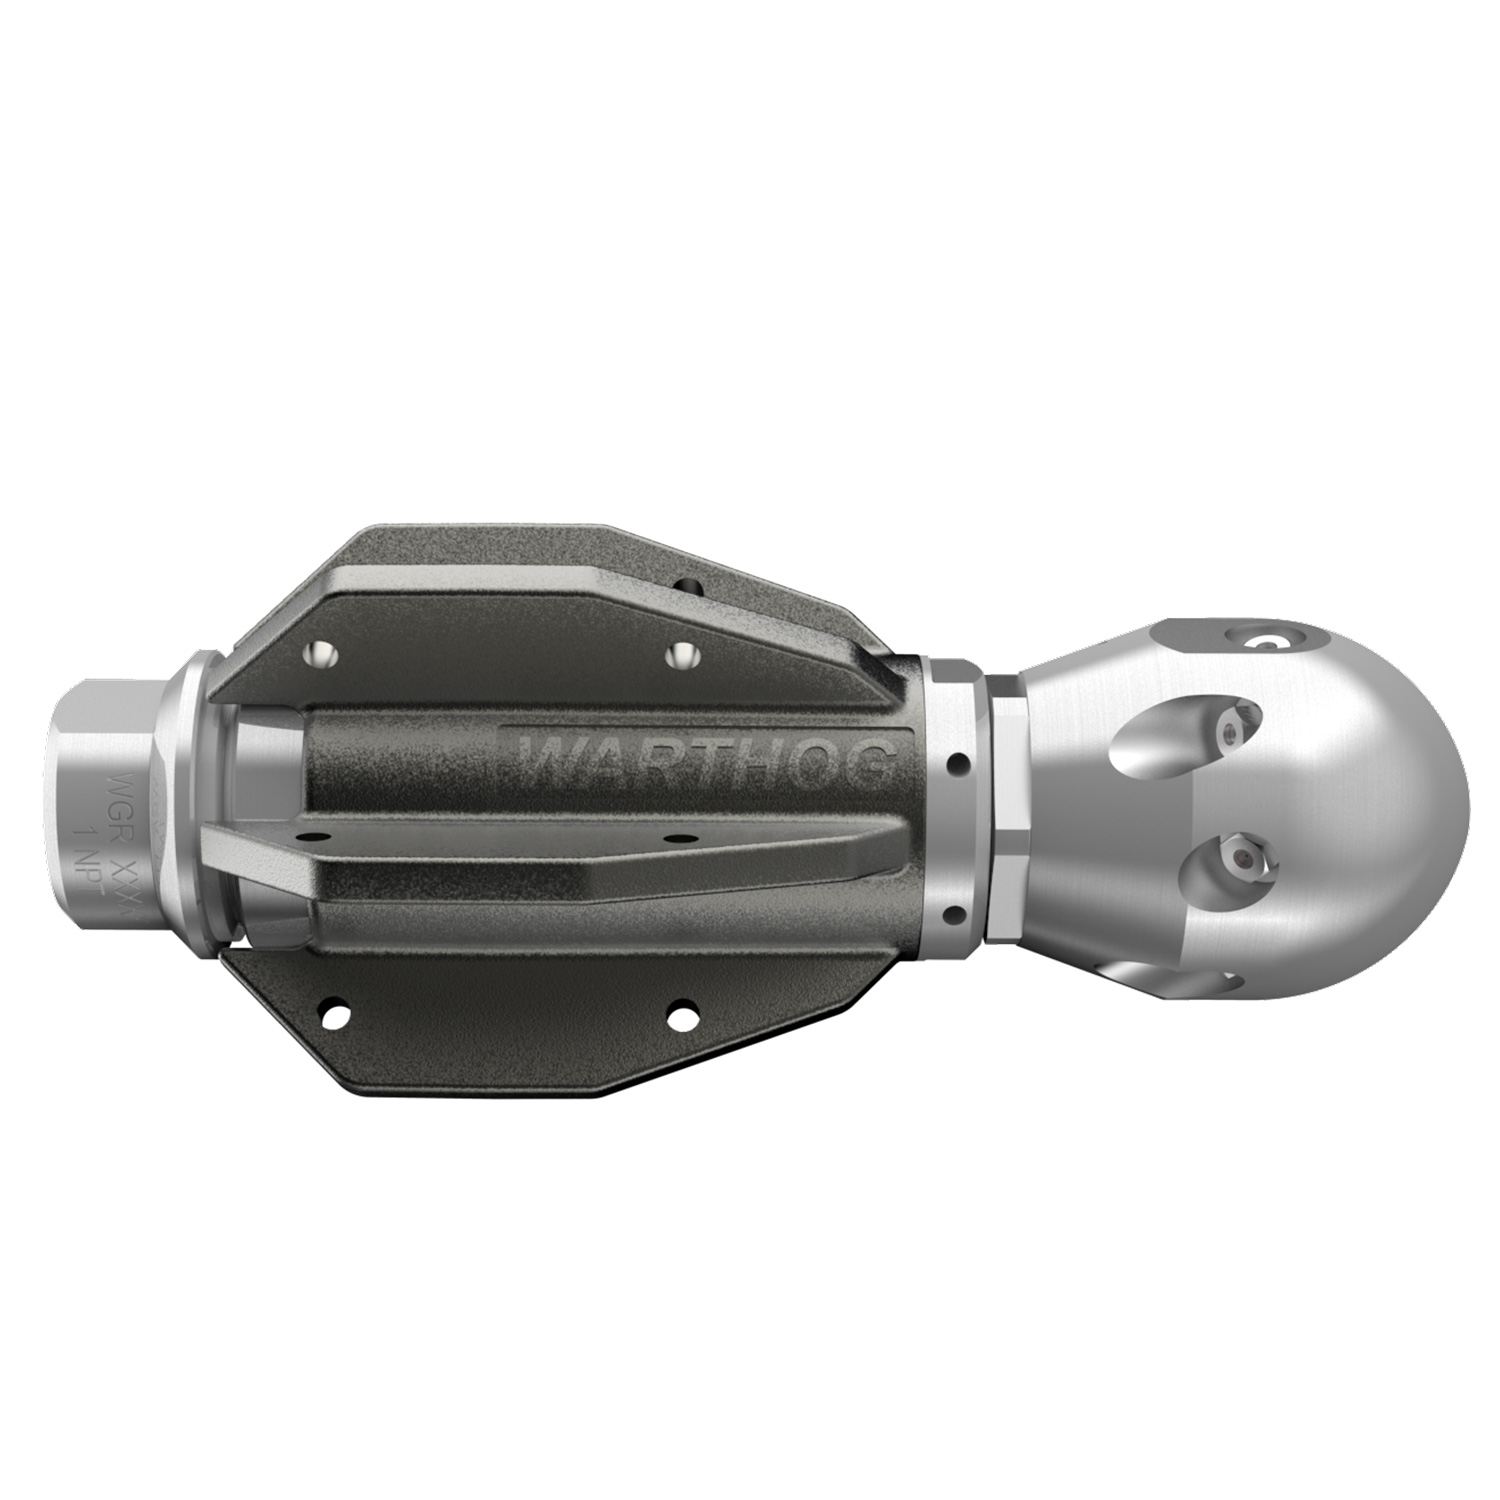 Warthog Guardian sewer nozzle for large pipes